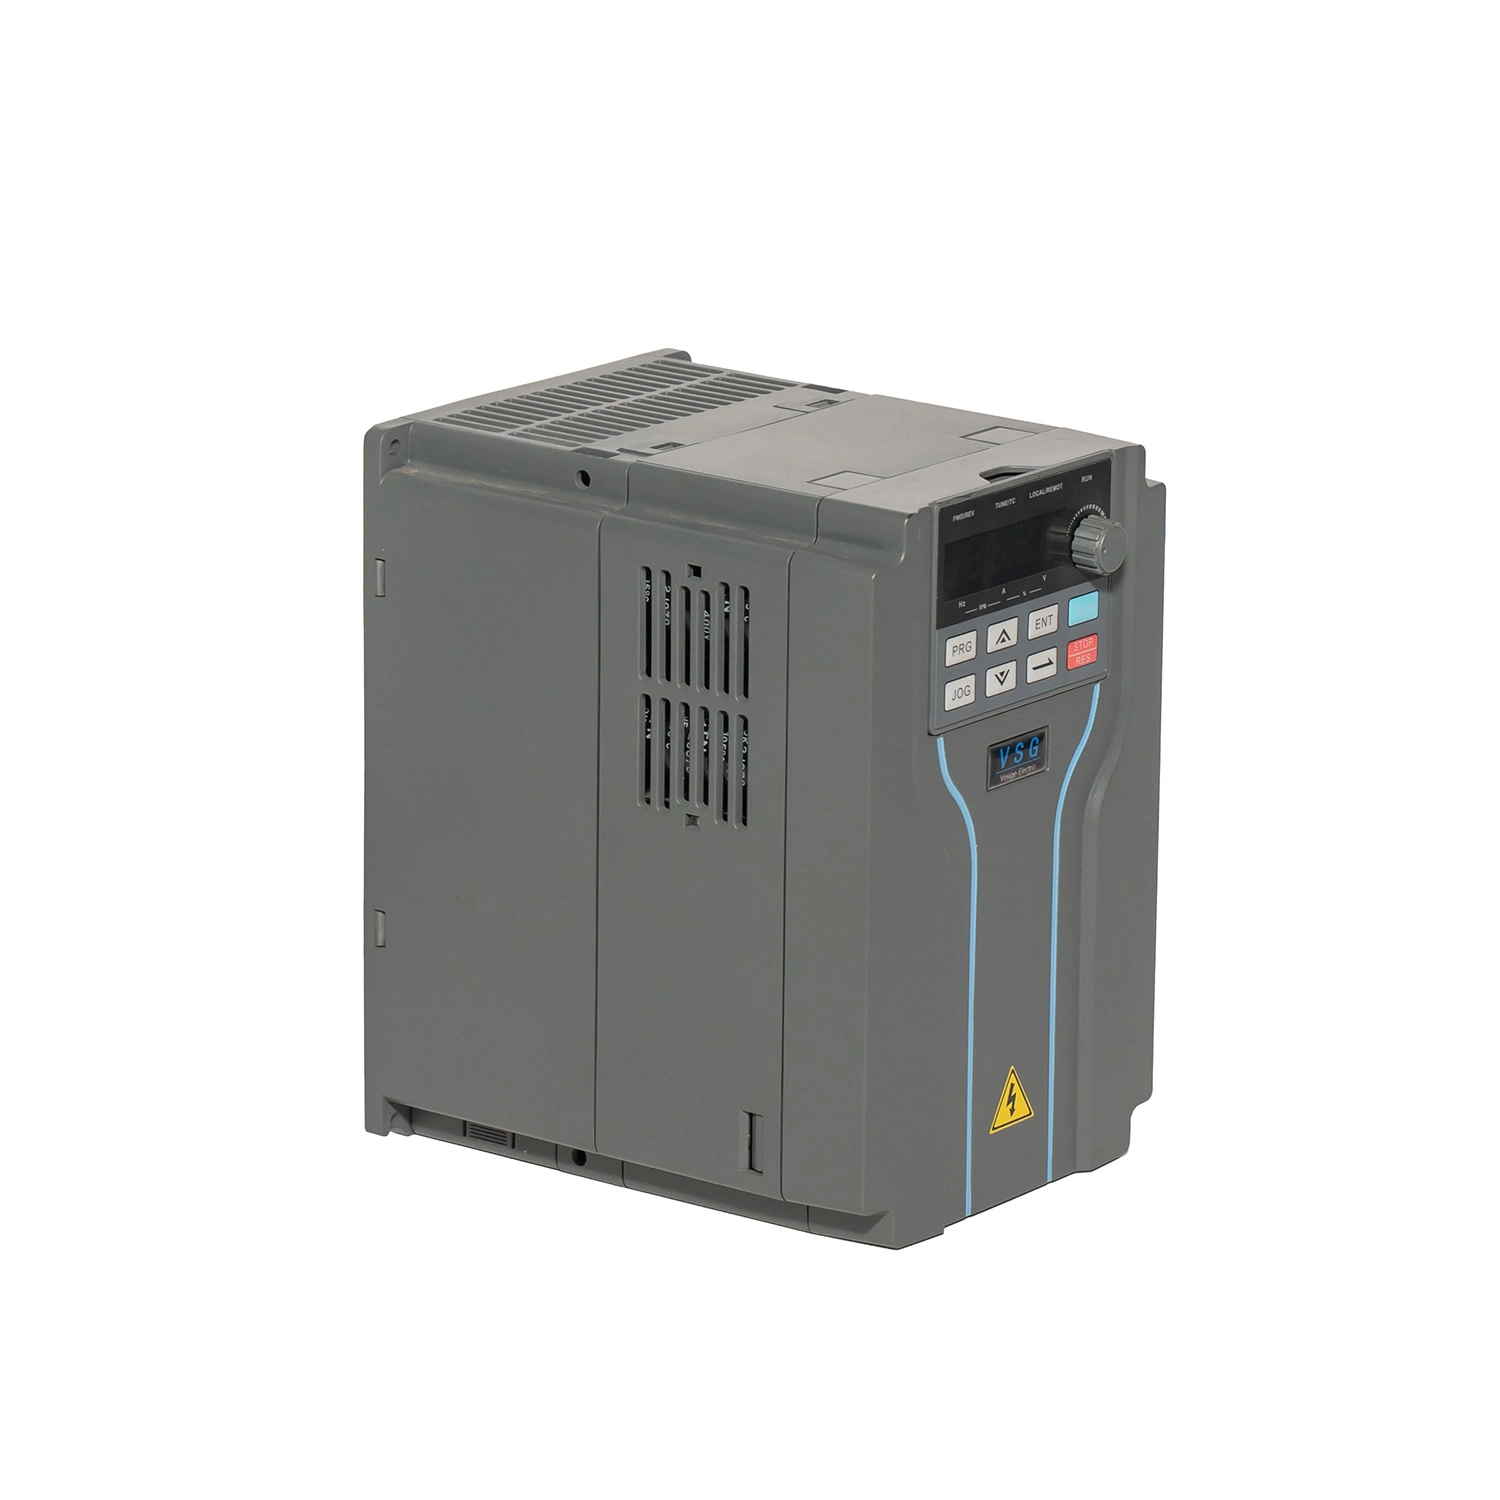 H100-0.75kw Series Low Power Three-Phase Frequency Inverter Variable-Frequency Drive